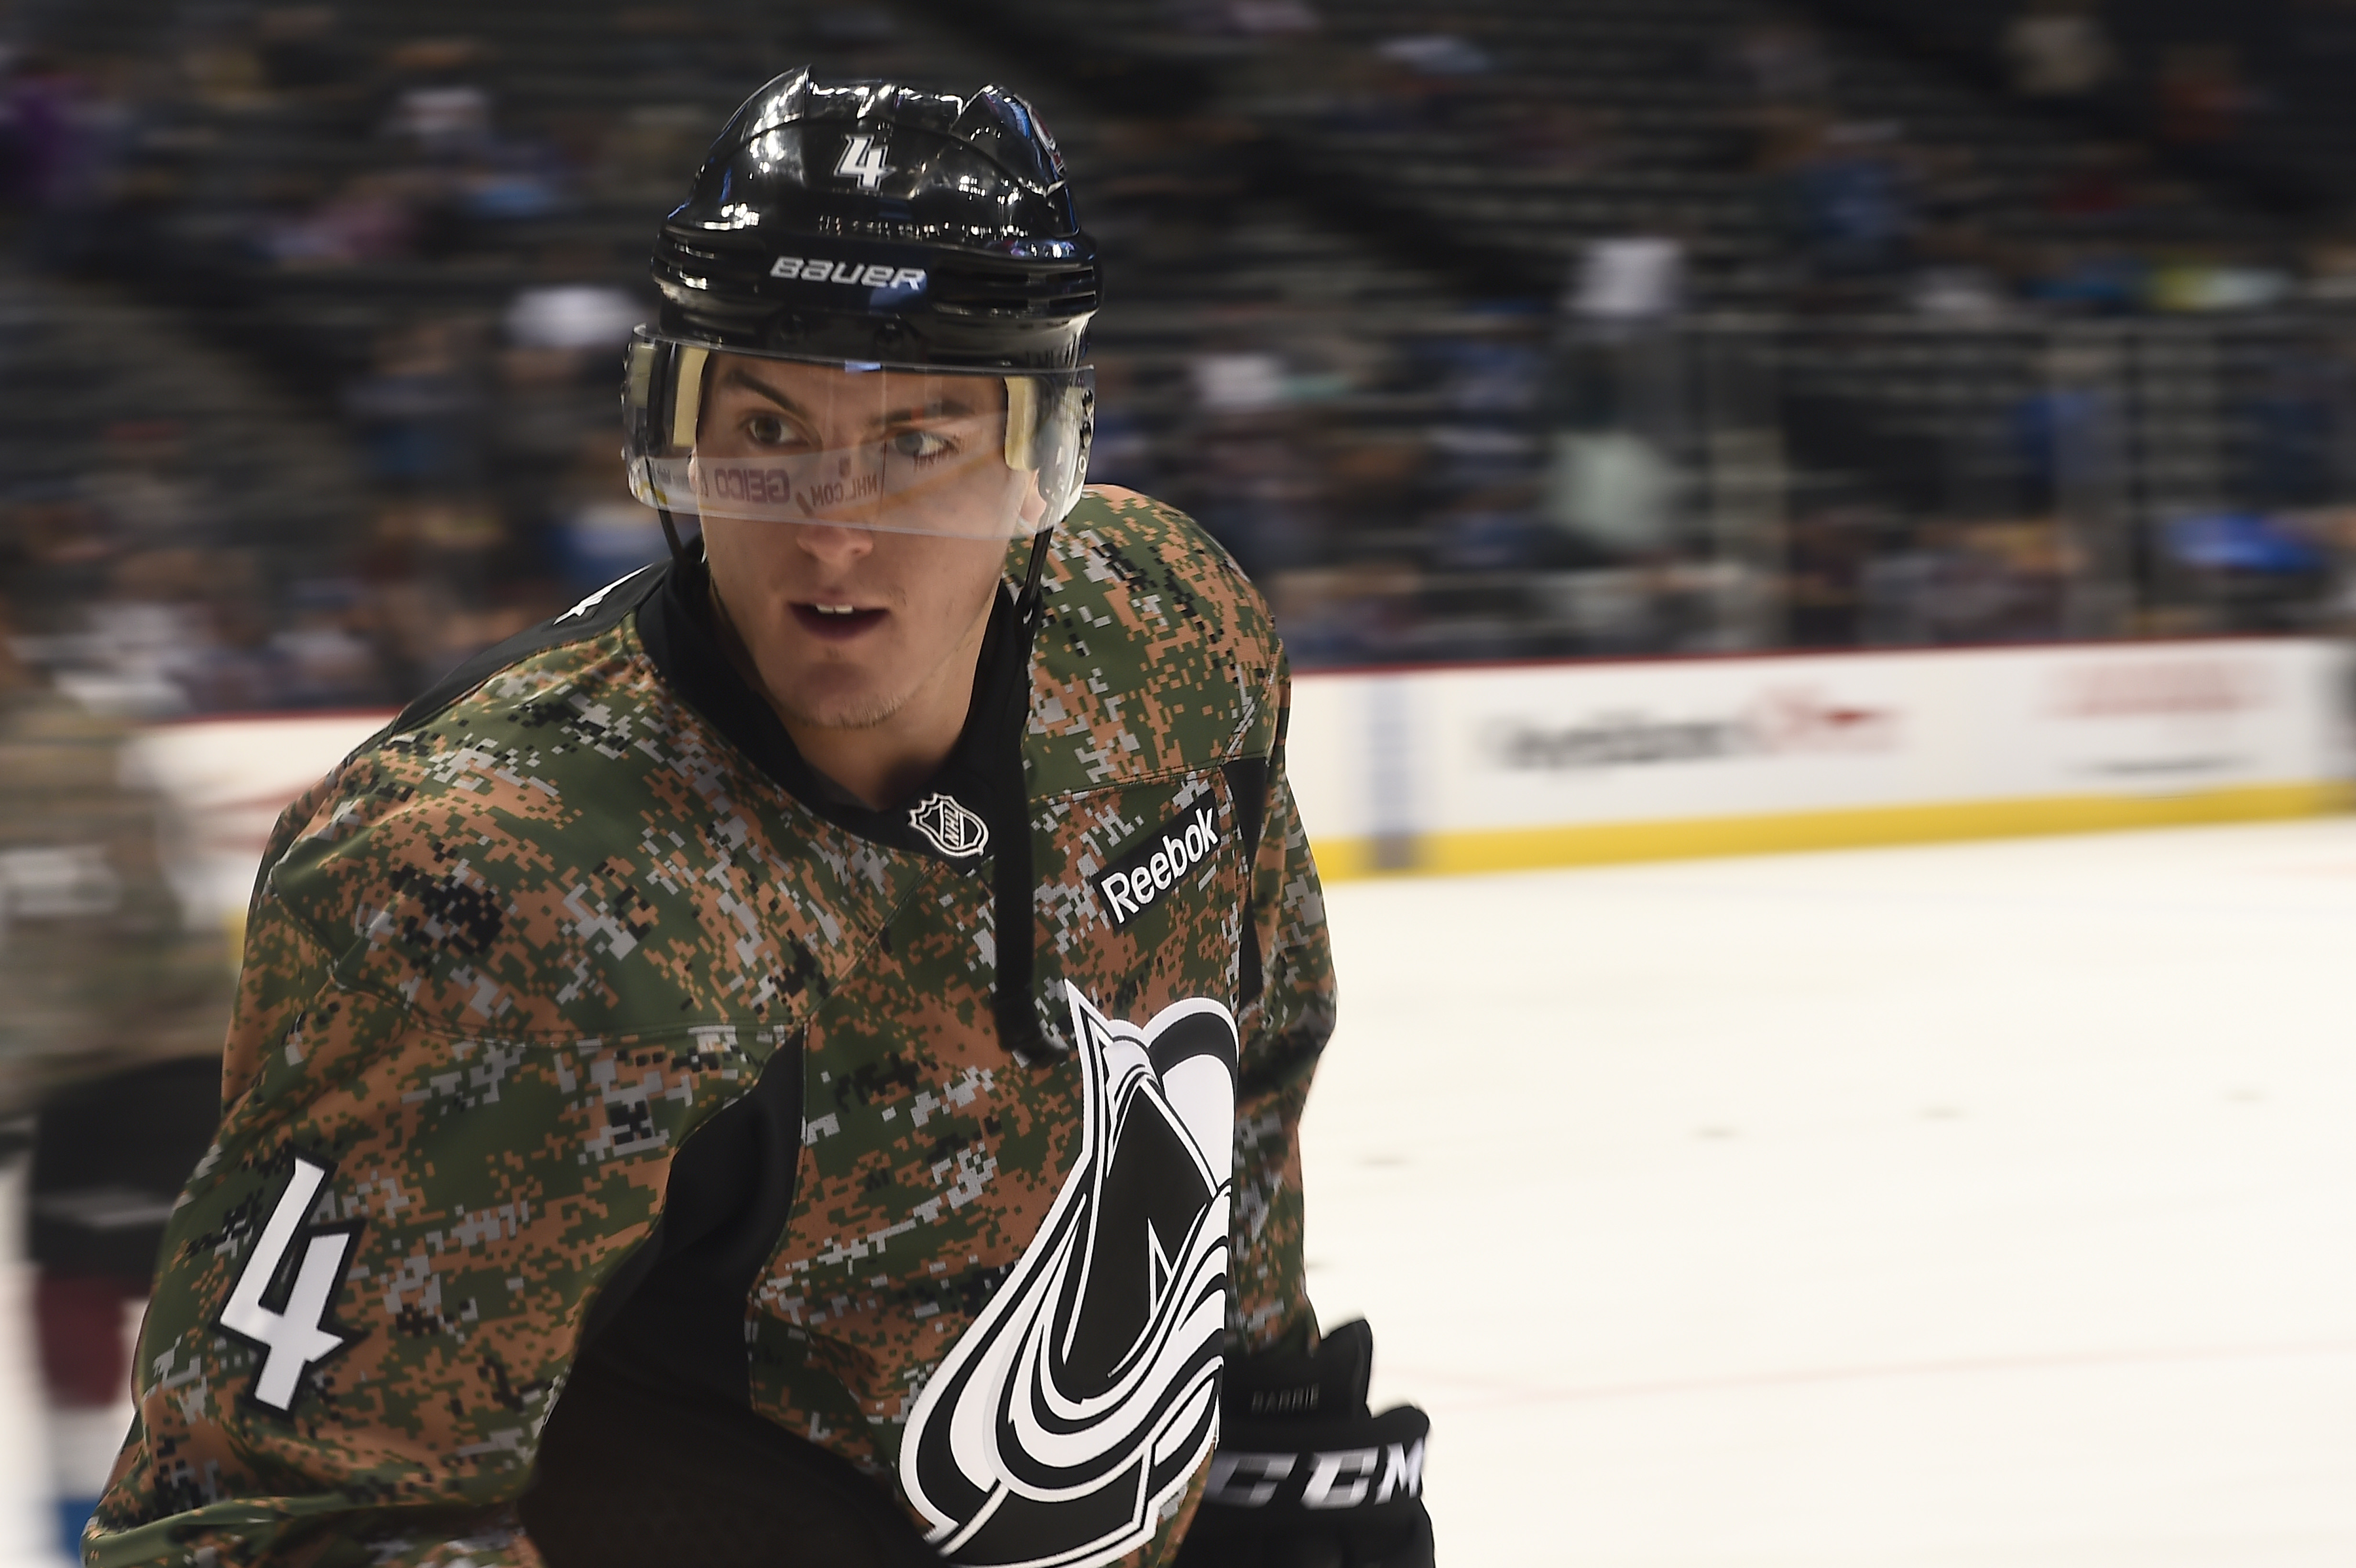 Colorado Avalanche - AVS MILITARY AUCTION: On 4/21, the Avs hosted Military  Appreciation Night to honor our service men and women. You have the  opportunity to own one of the one-of-a-kind camouflage